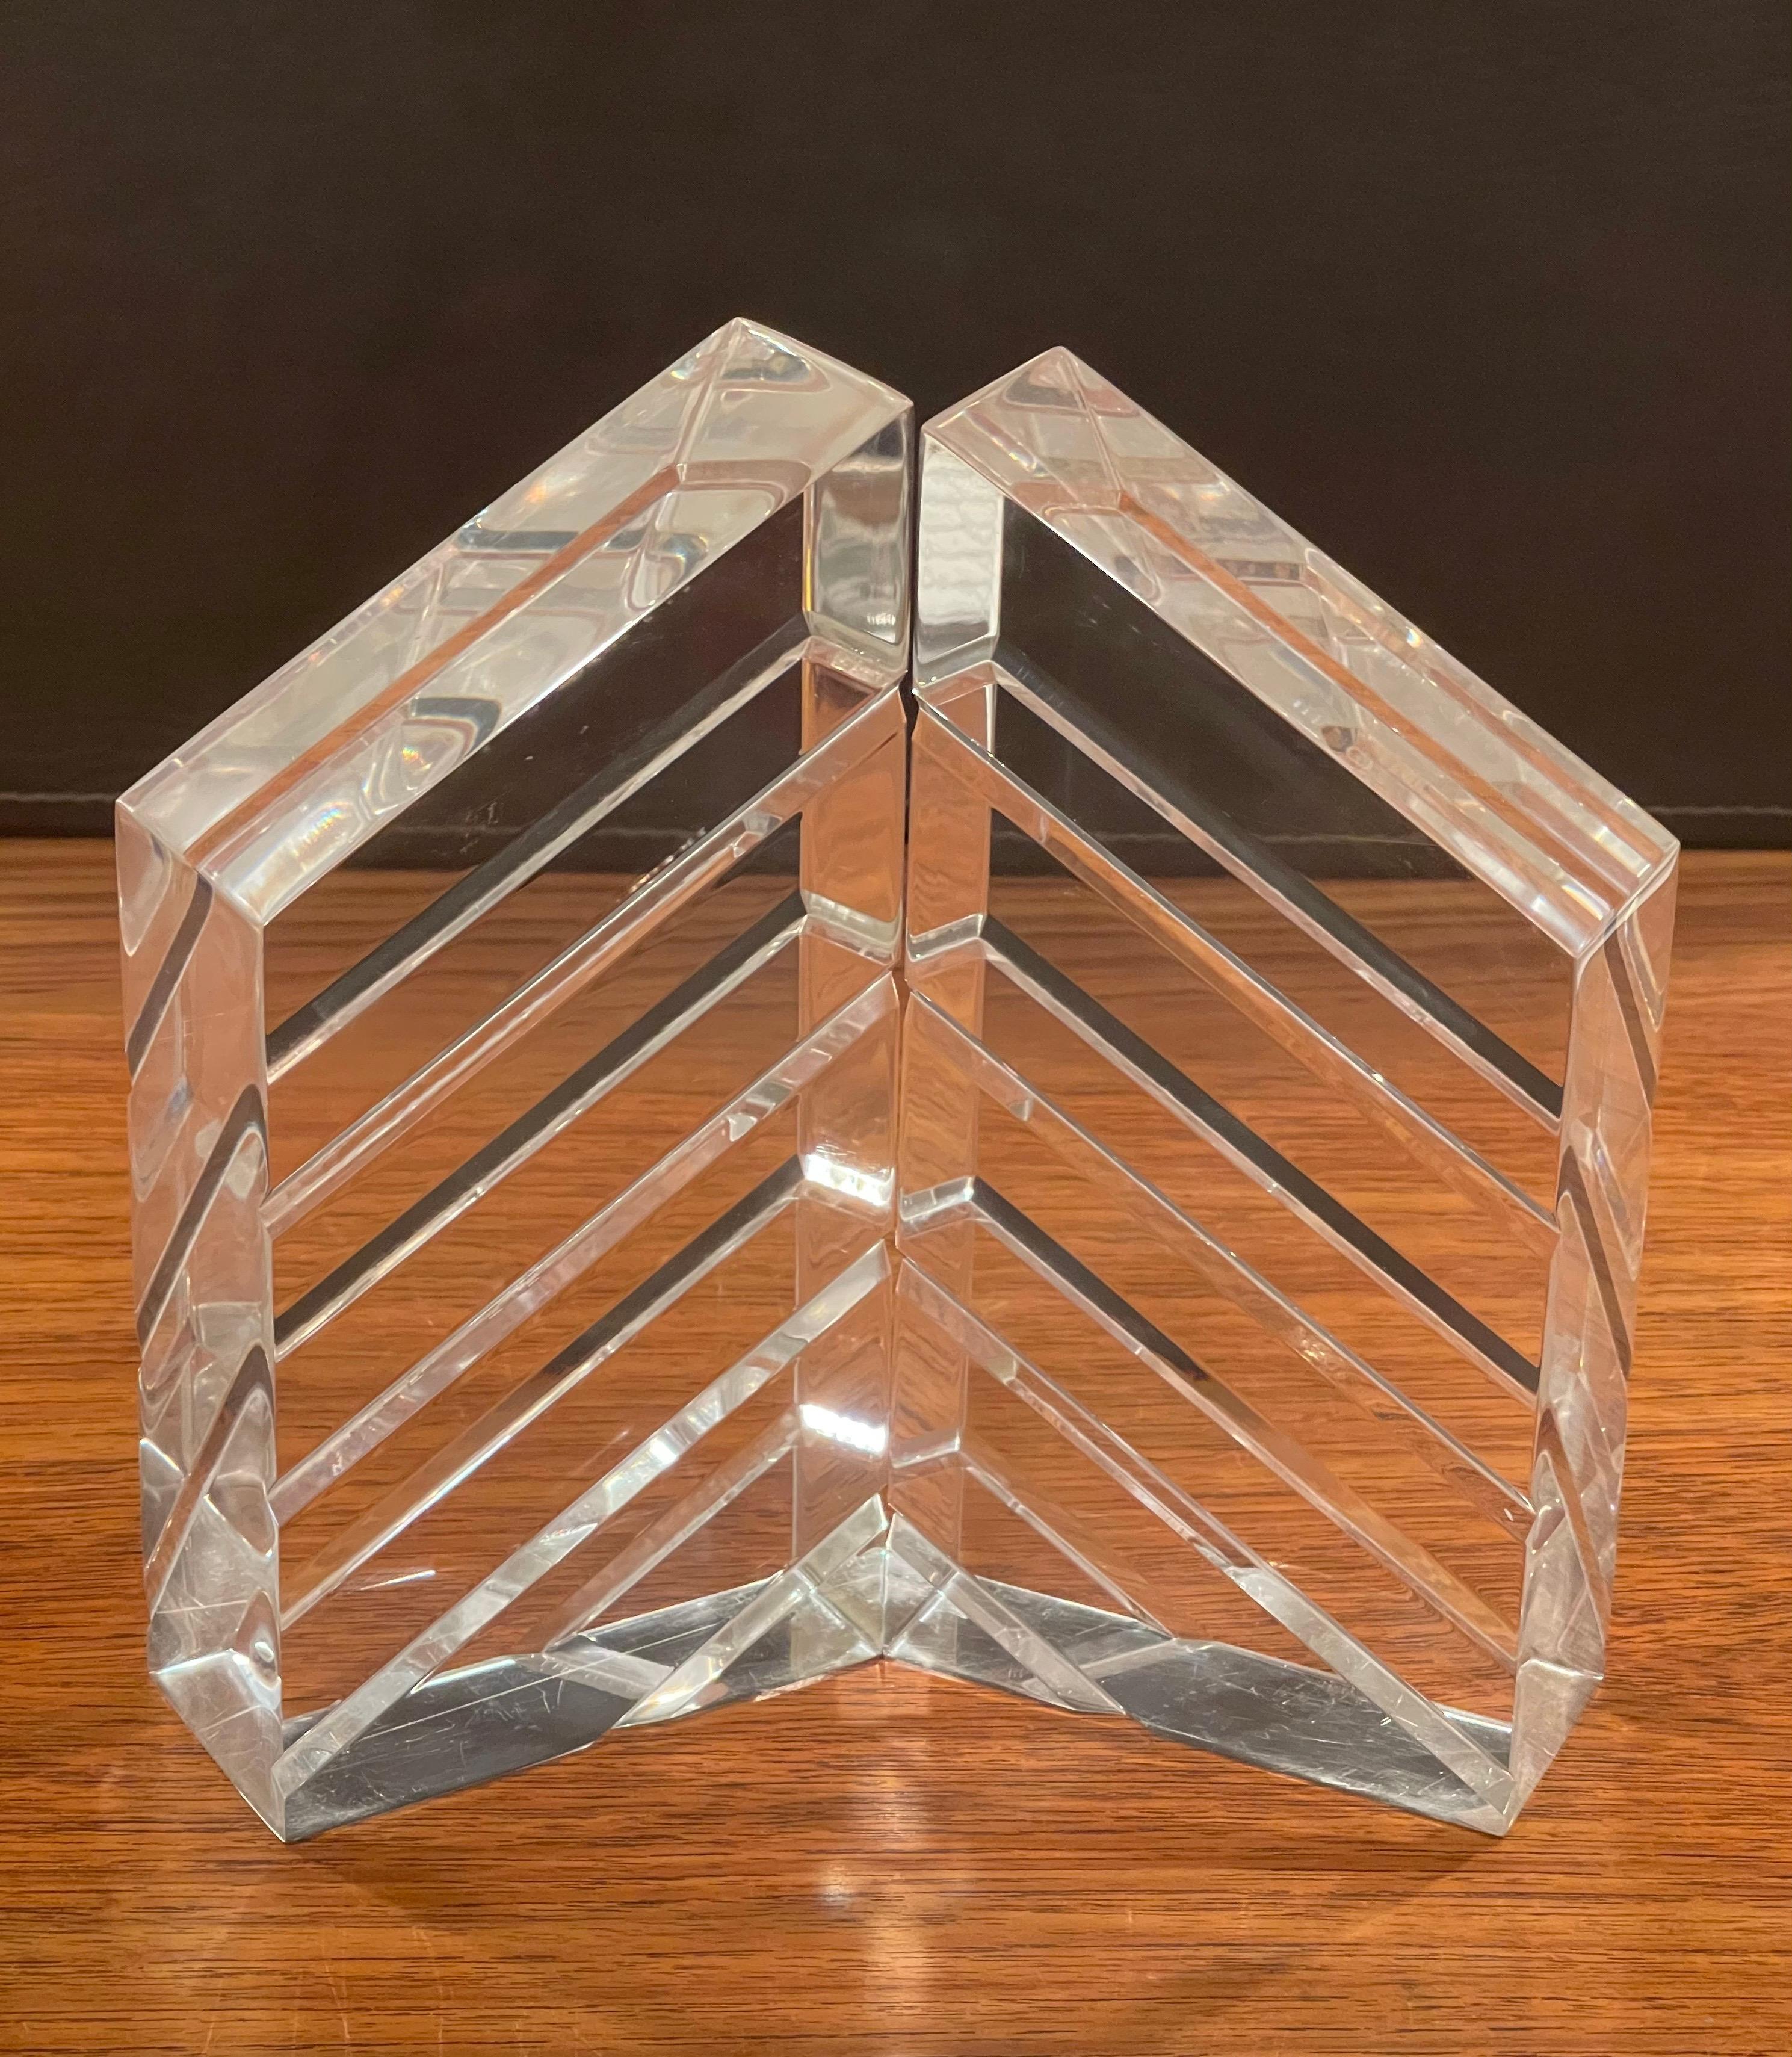 A gorgeous pair of mid-century lucite bookends by Herb Ritts for Astrolite, circa 1970s. The pair are in excellent condition and would make a great addition to any midcentury study or library! #1929.